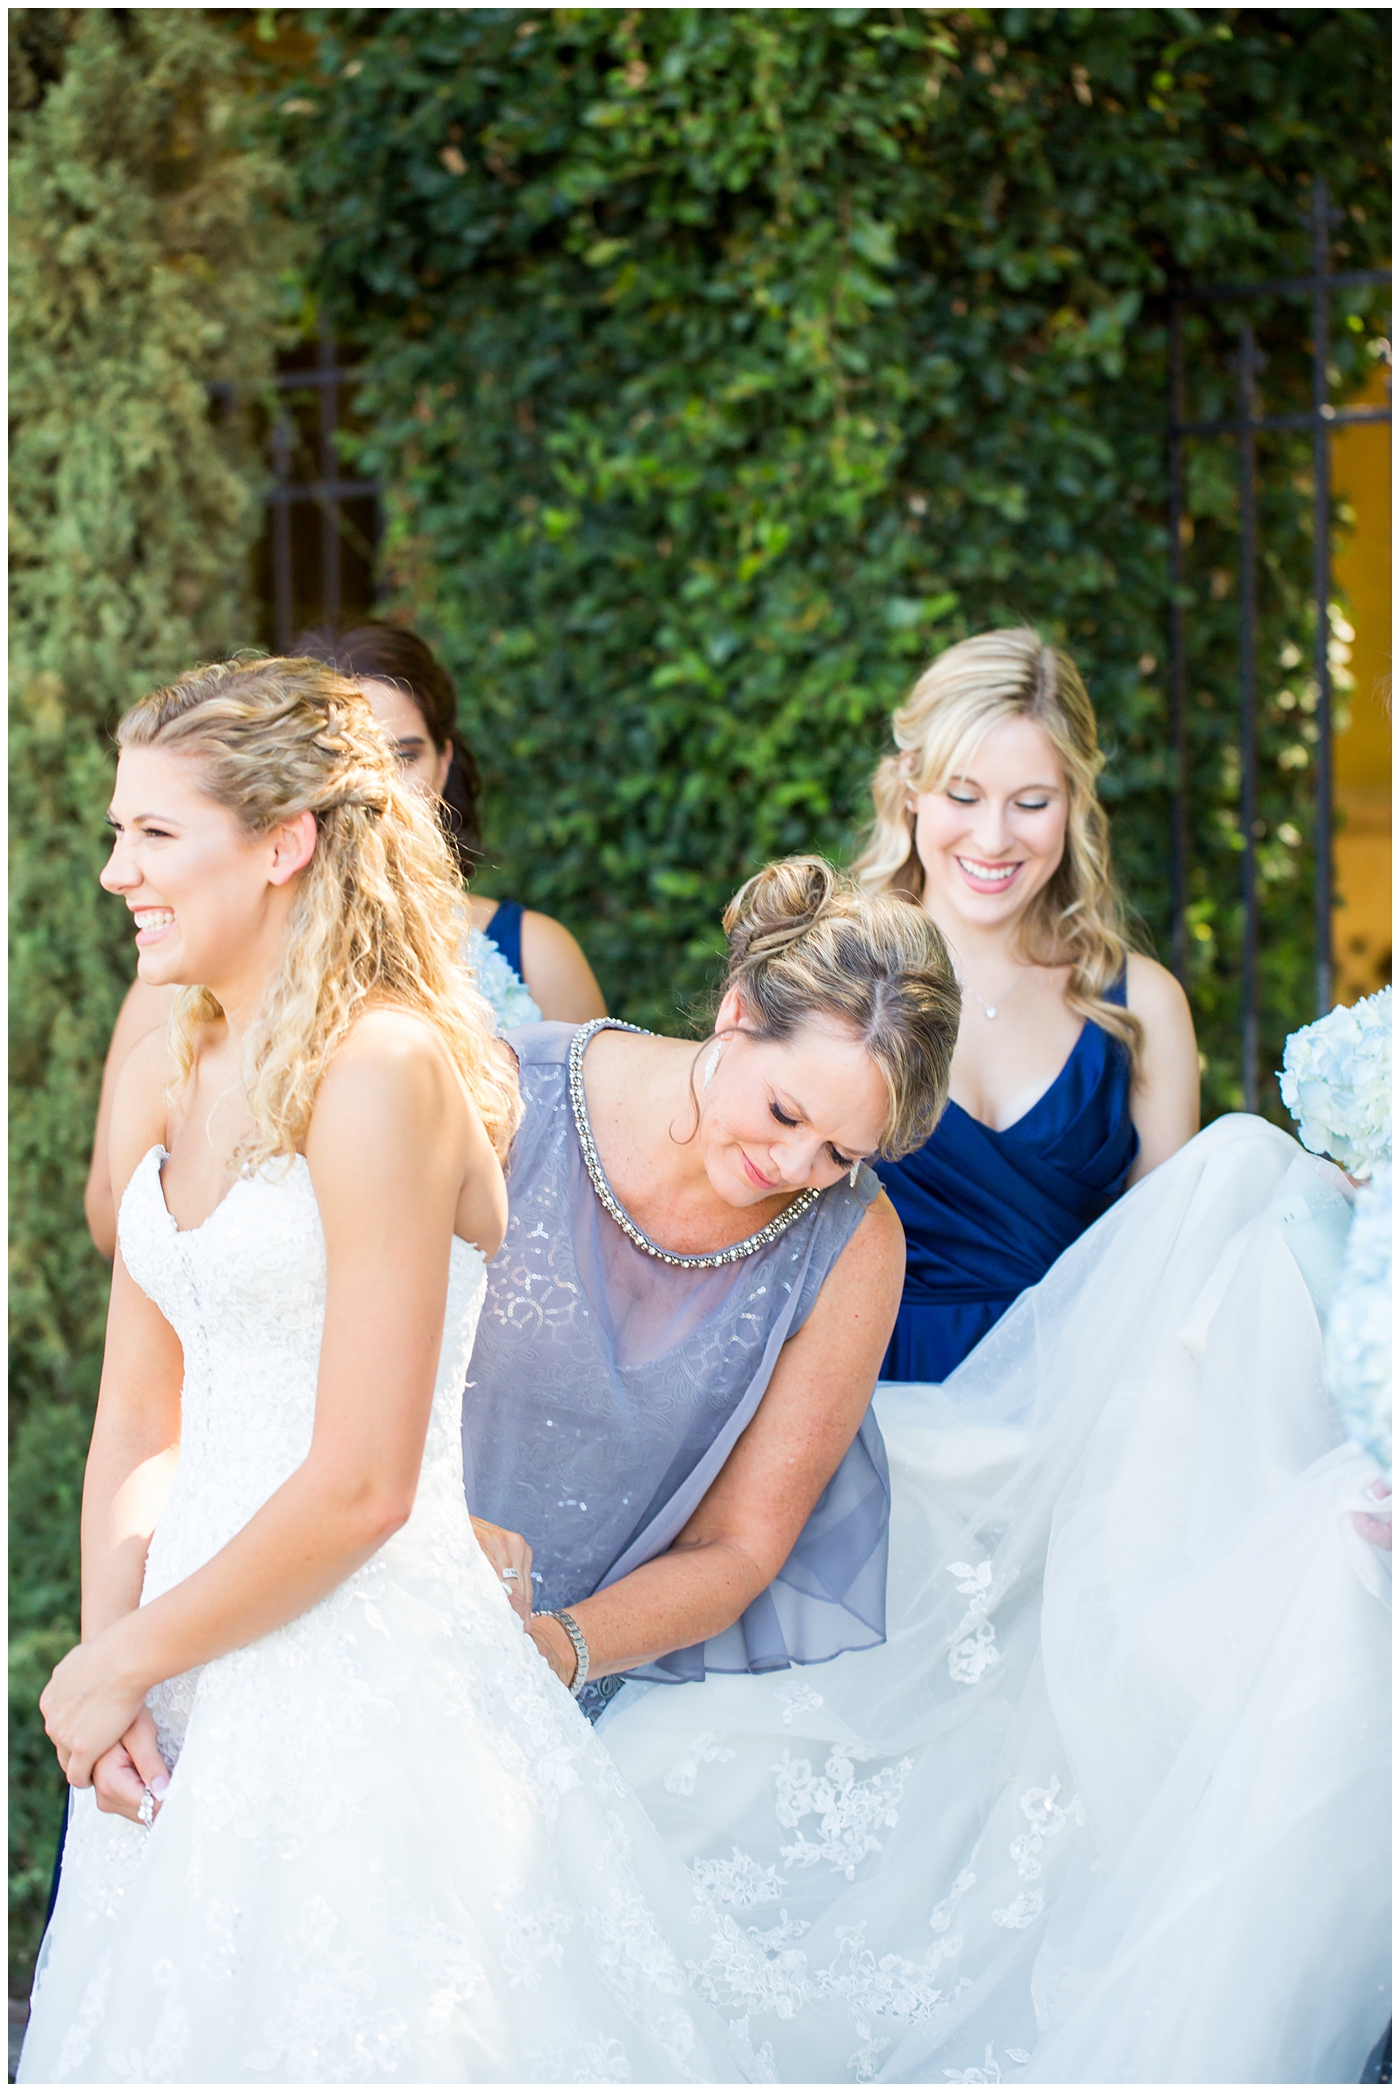 bride in strapless lace dress with white flower bouquet with roses and hydrangeas with bridesmaids in royal blue long dresses with blue hydrangeas bouquets getting ready on wedding day